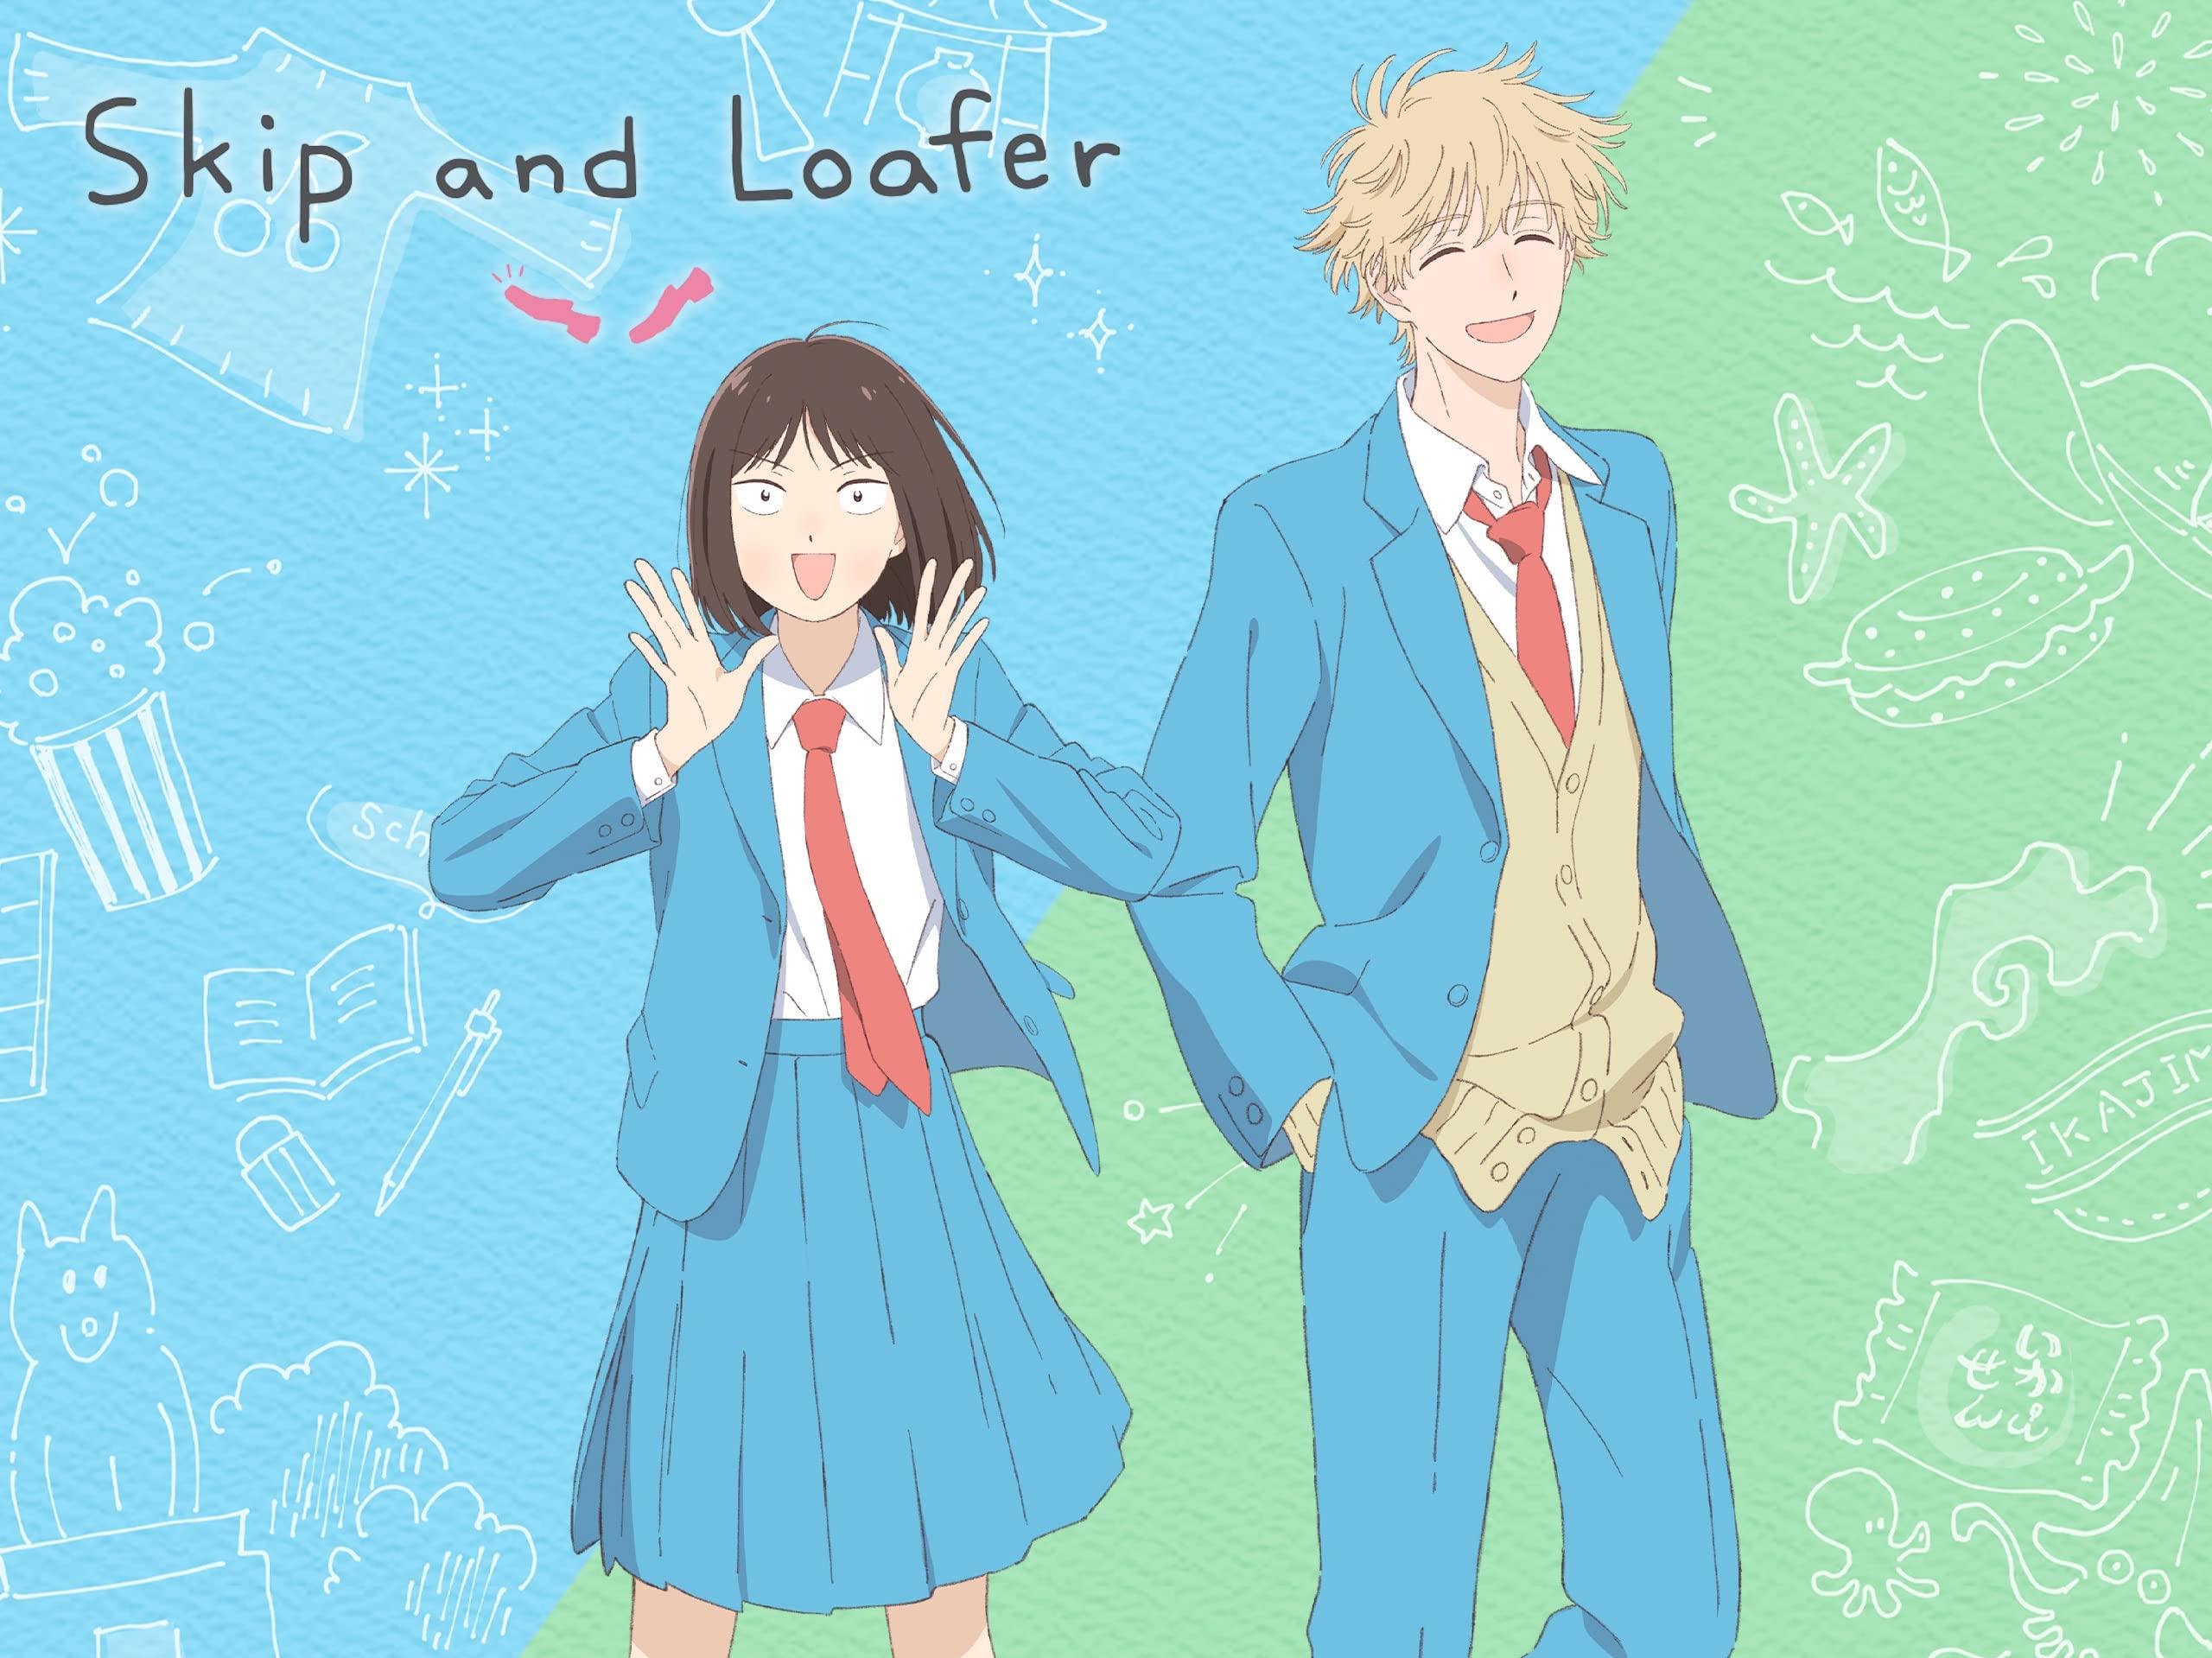 Skip to Loafer (Skip and Loafer) - Zerochan Anime Image Board